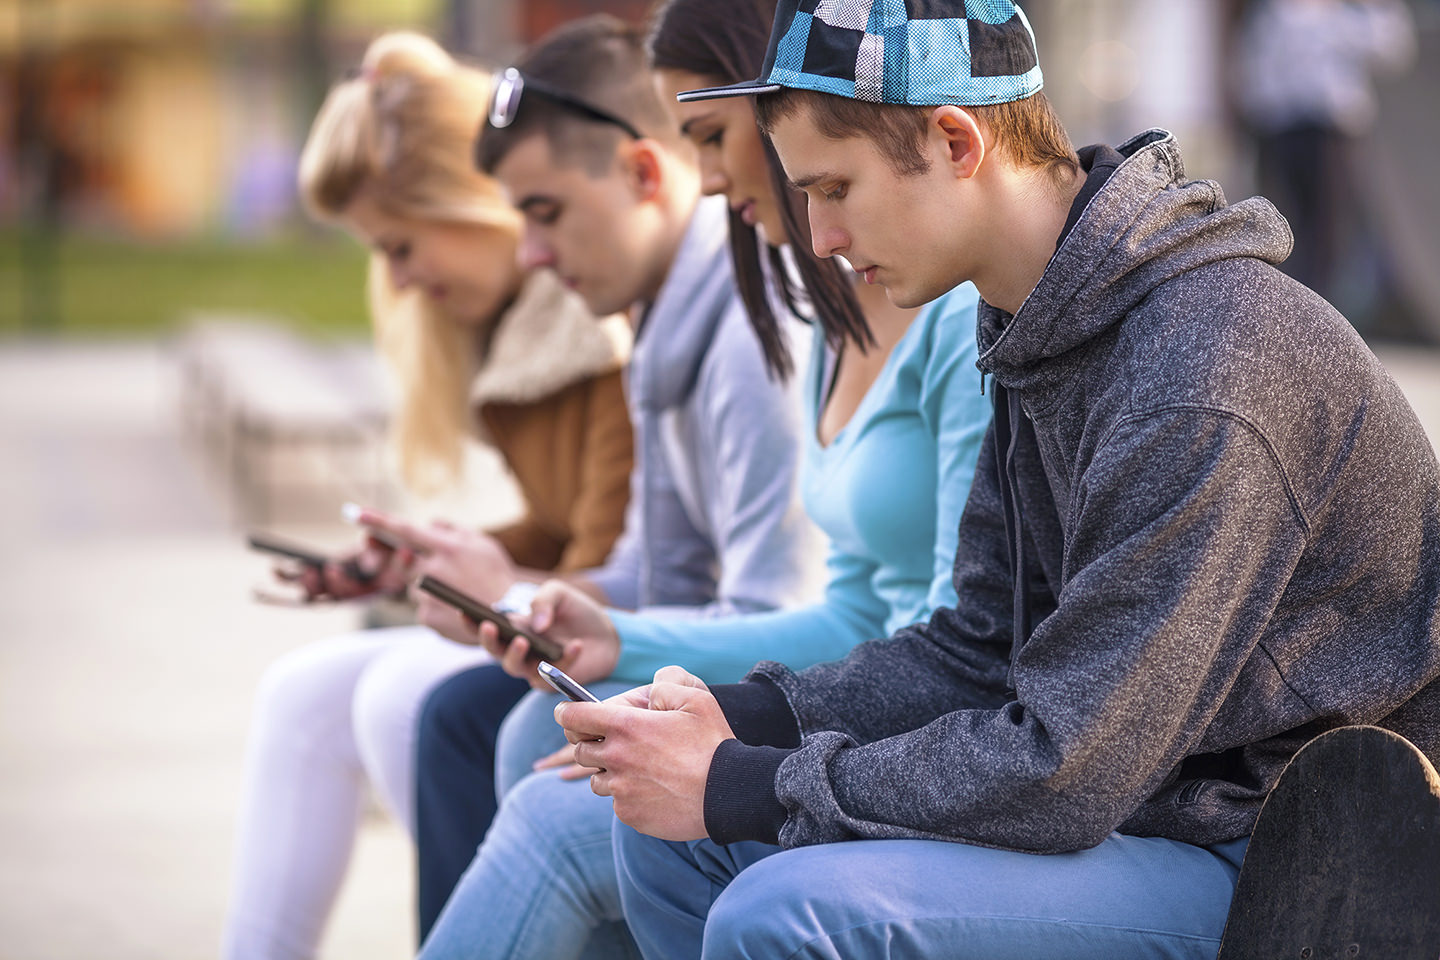 Teen Screen Activities Linked to Less Happiness — No Exceptions